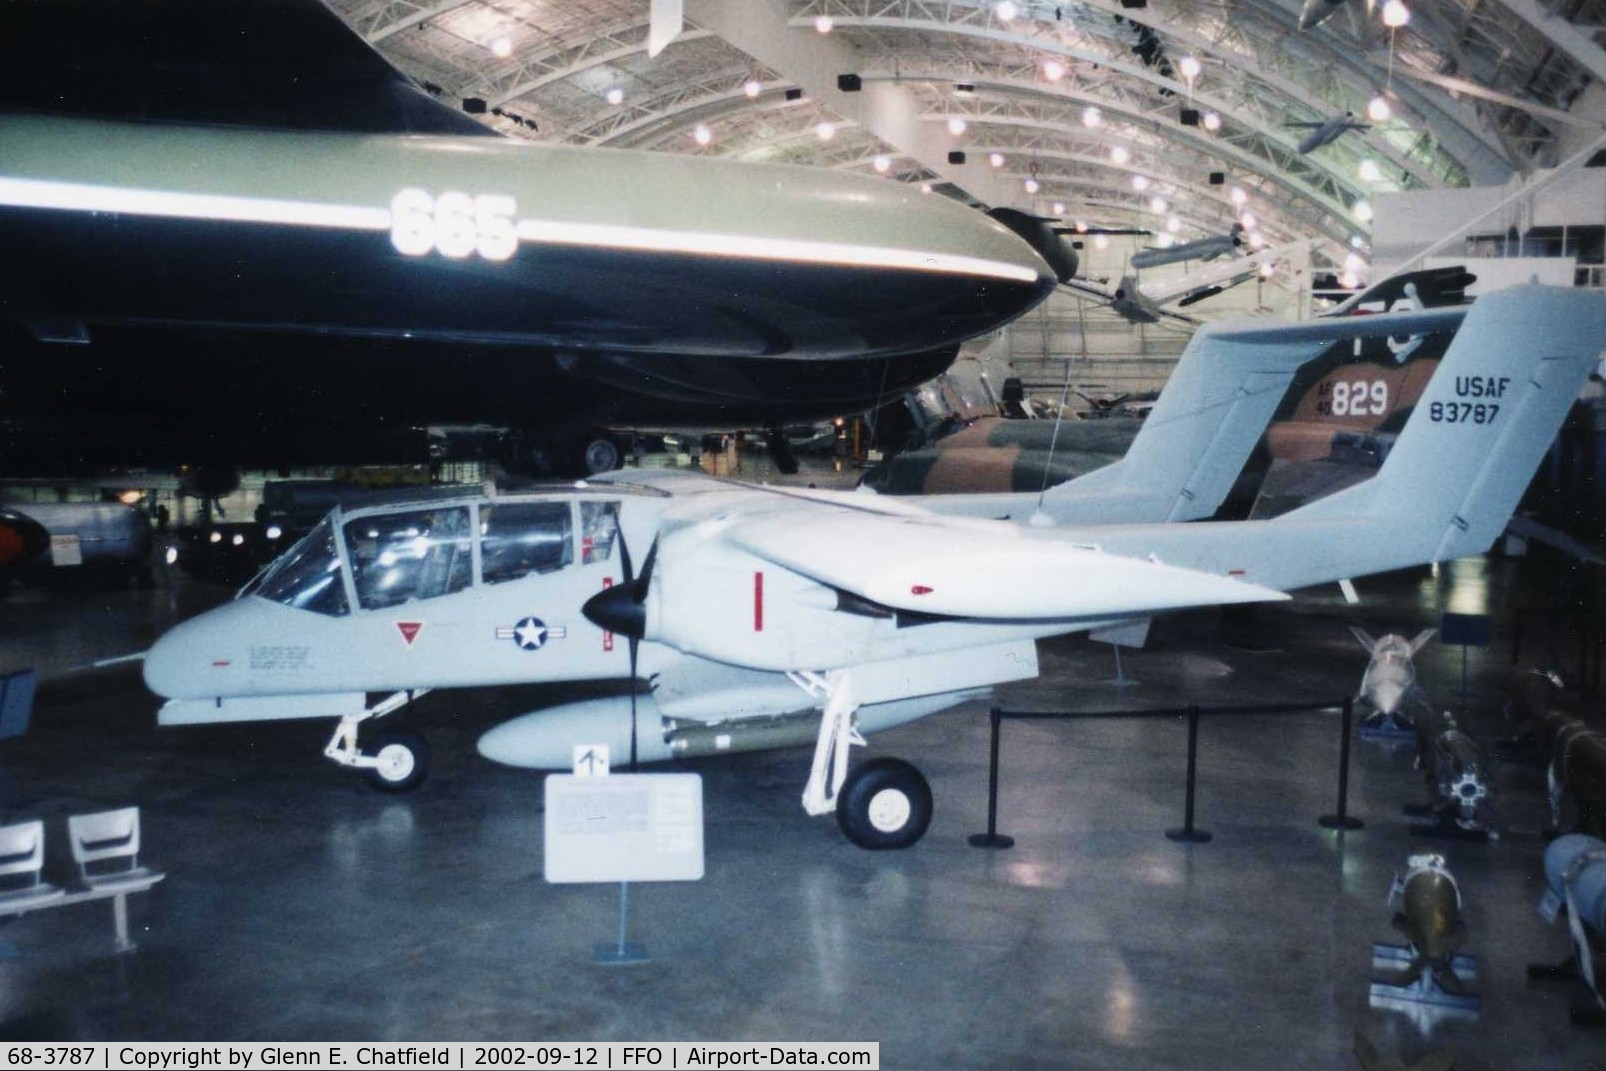 68-3787, 1968 North American Rockwell OV-10A Bronco C/N 321-113, OV-10A At the National Museum of the U.S. Air Force